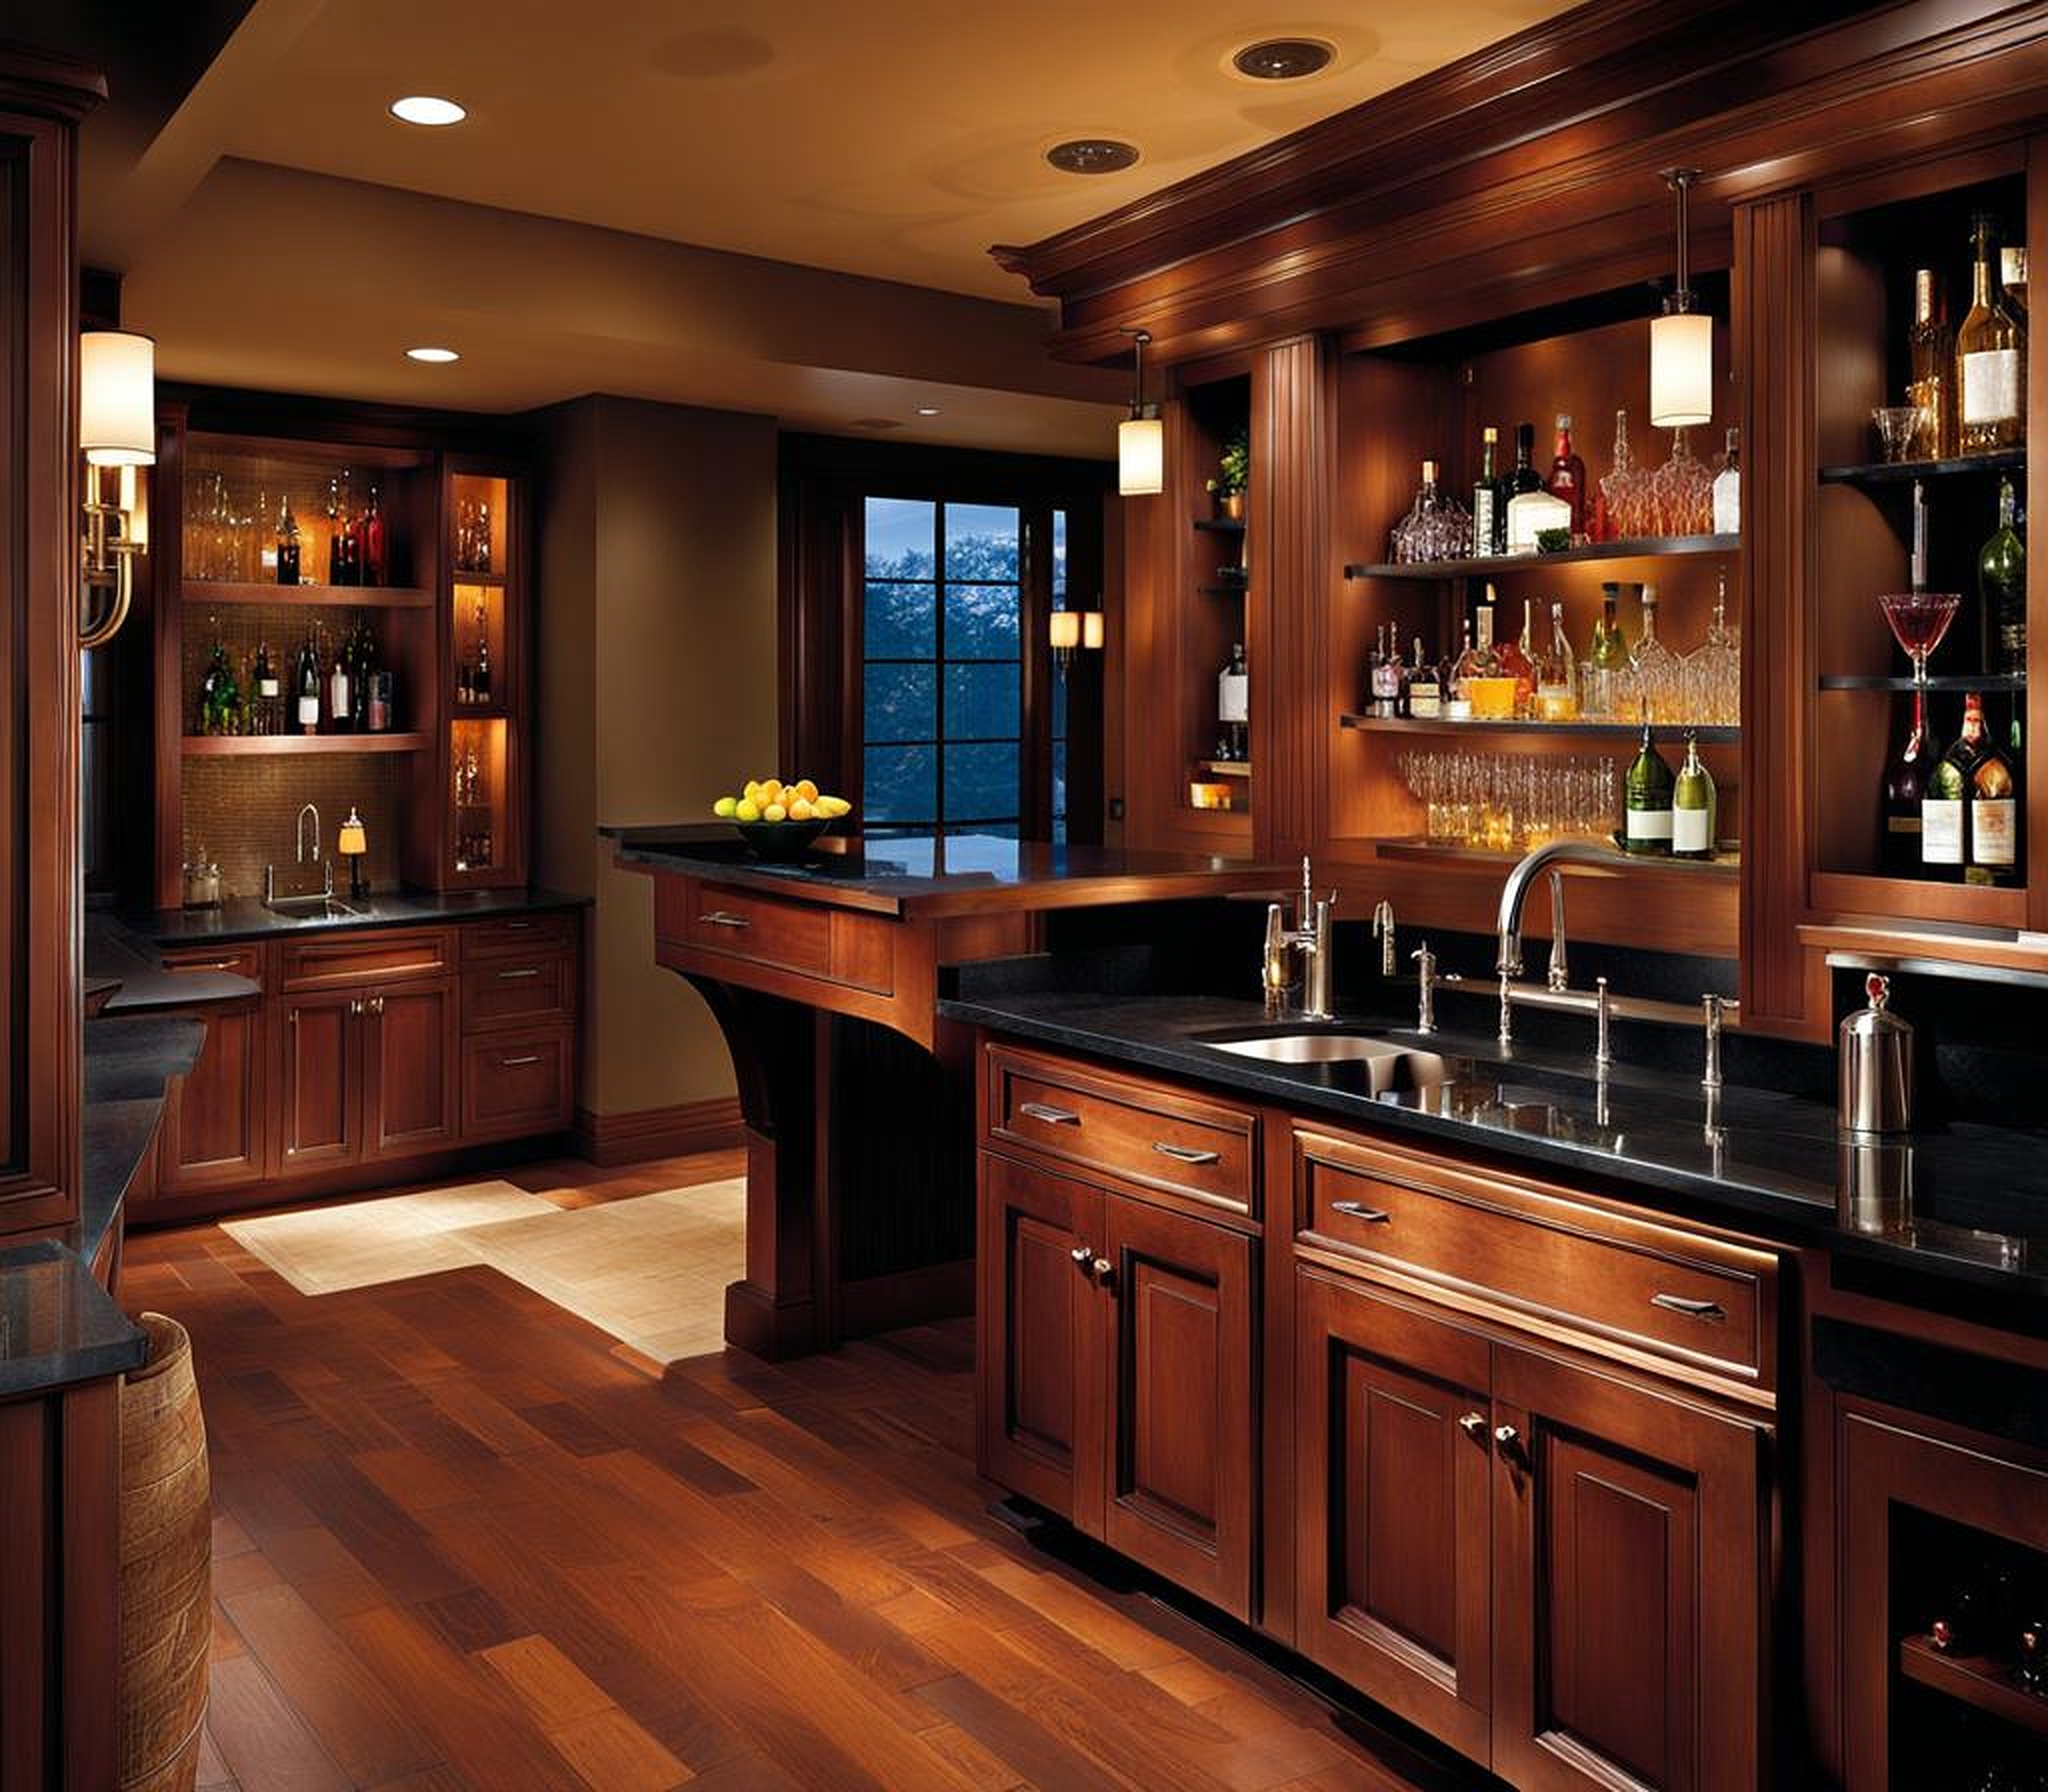 Best Wet Bar Designs Incorporating Sinks for Extra Storage